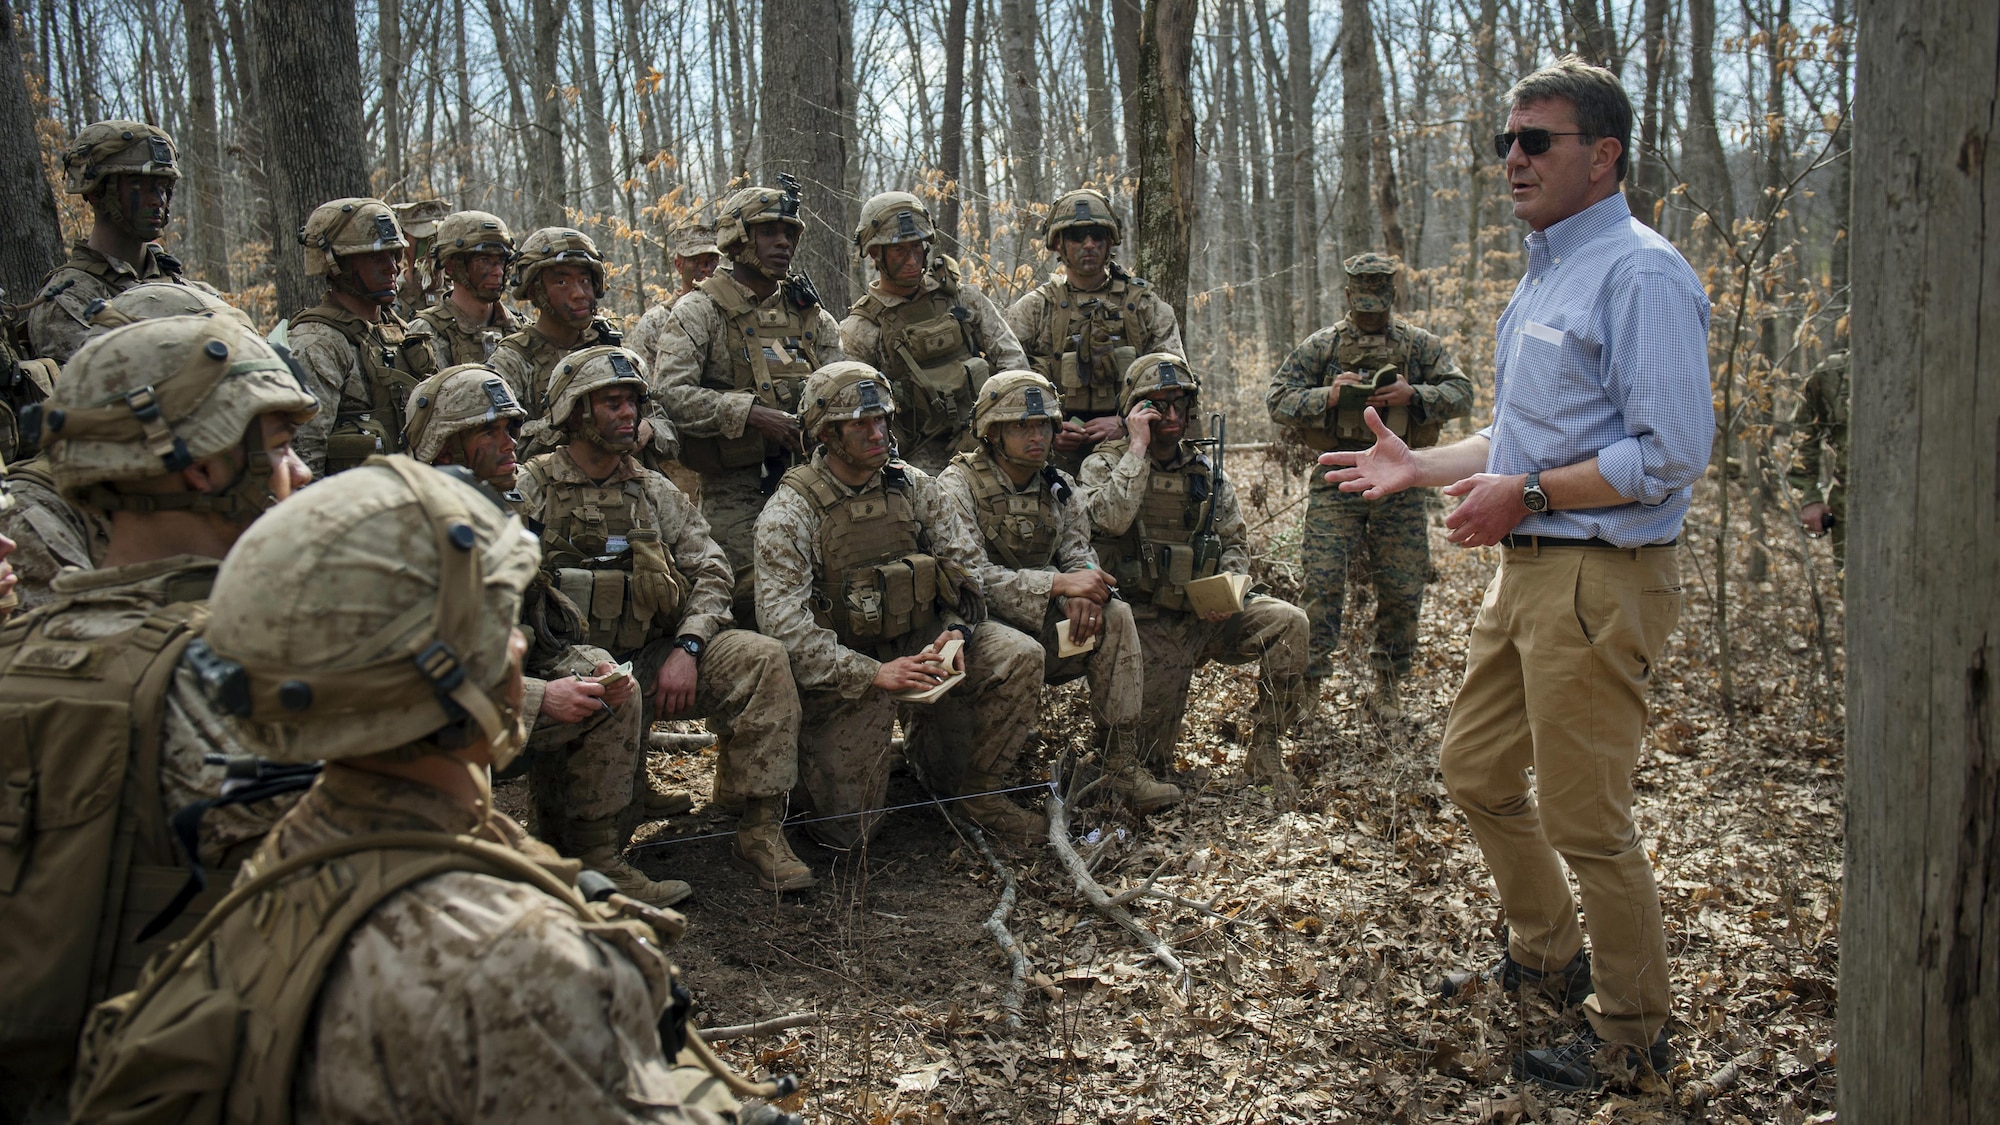 Marines at The Basic School participating in a a platoon in defense demonstration at Marine Corps Base Quantico, Va., take a break from training in order to speak with Secretary of Defense Ash Carter as he visits the base March 9, 2016. He visited the base to observe Marine Corps training and speak with Marines March 9, 2016.(DoD photo by Senior Master Sgt. Adrian Cadiz)